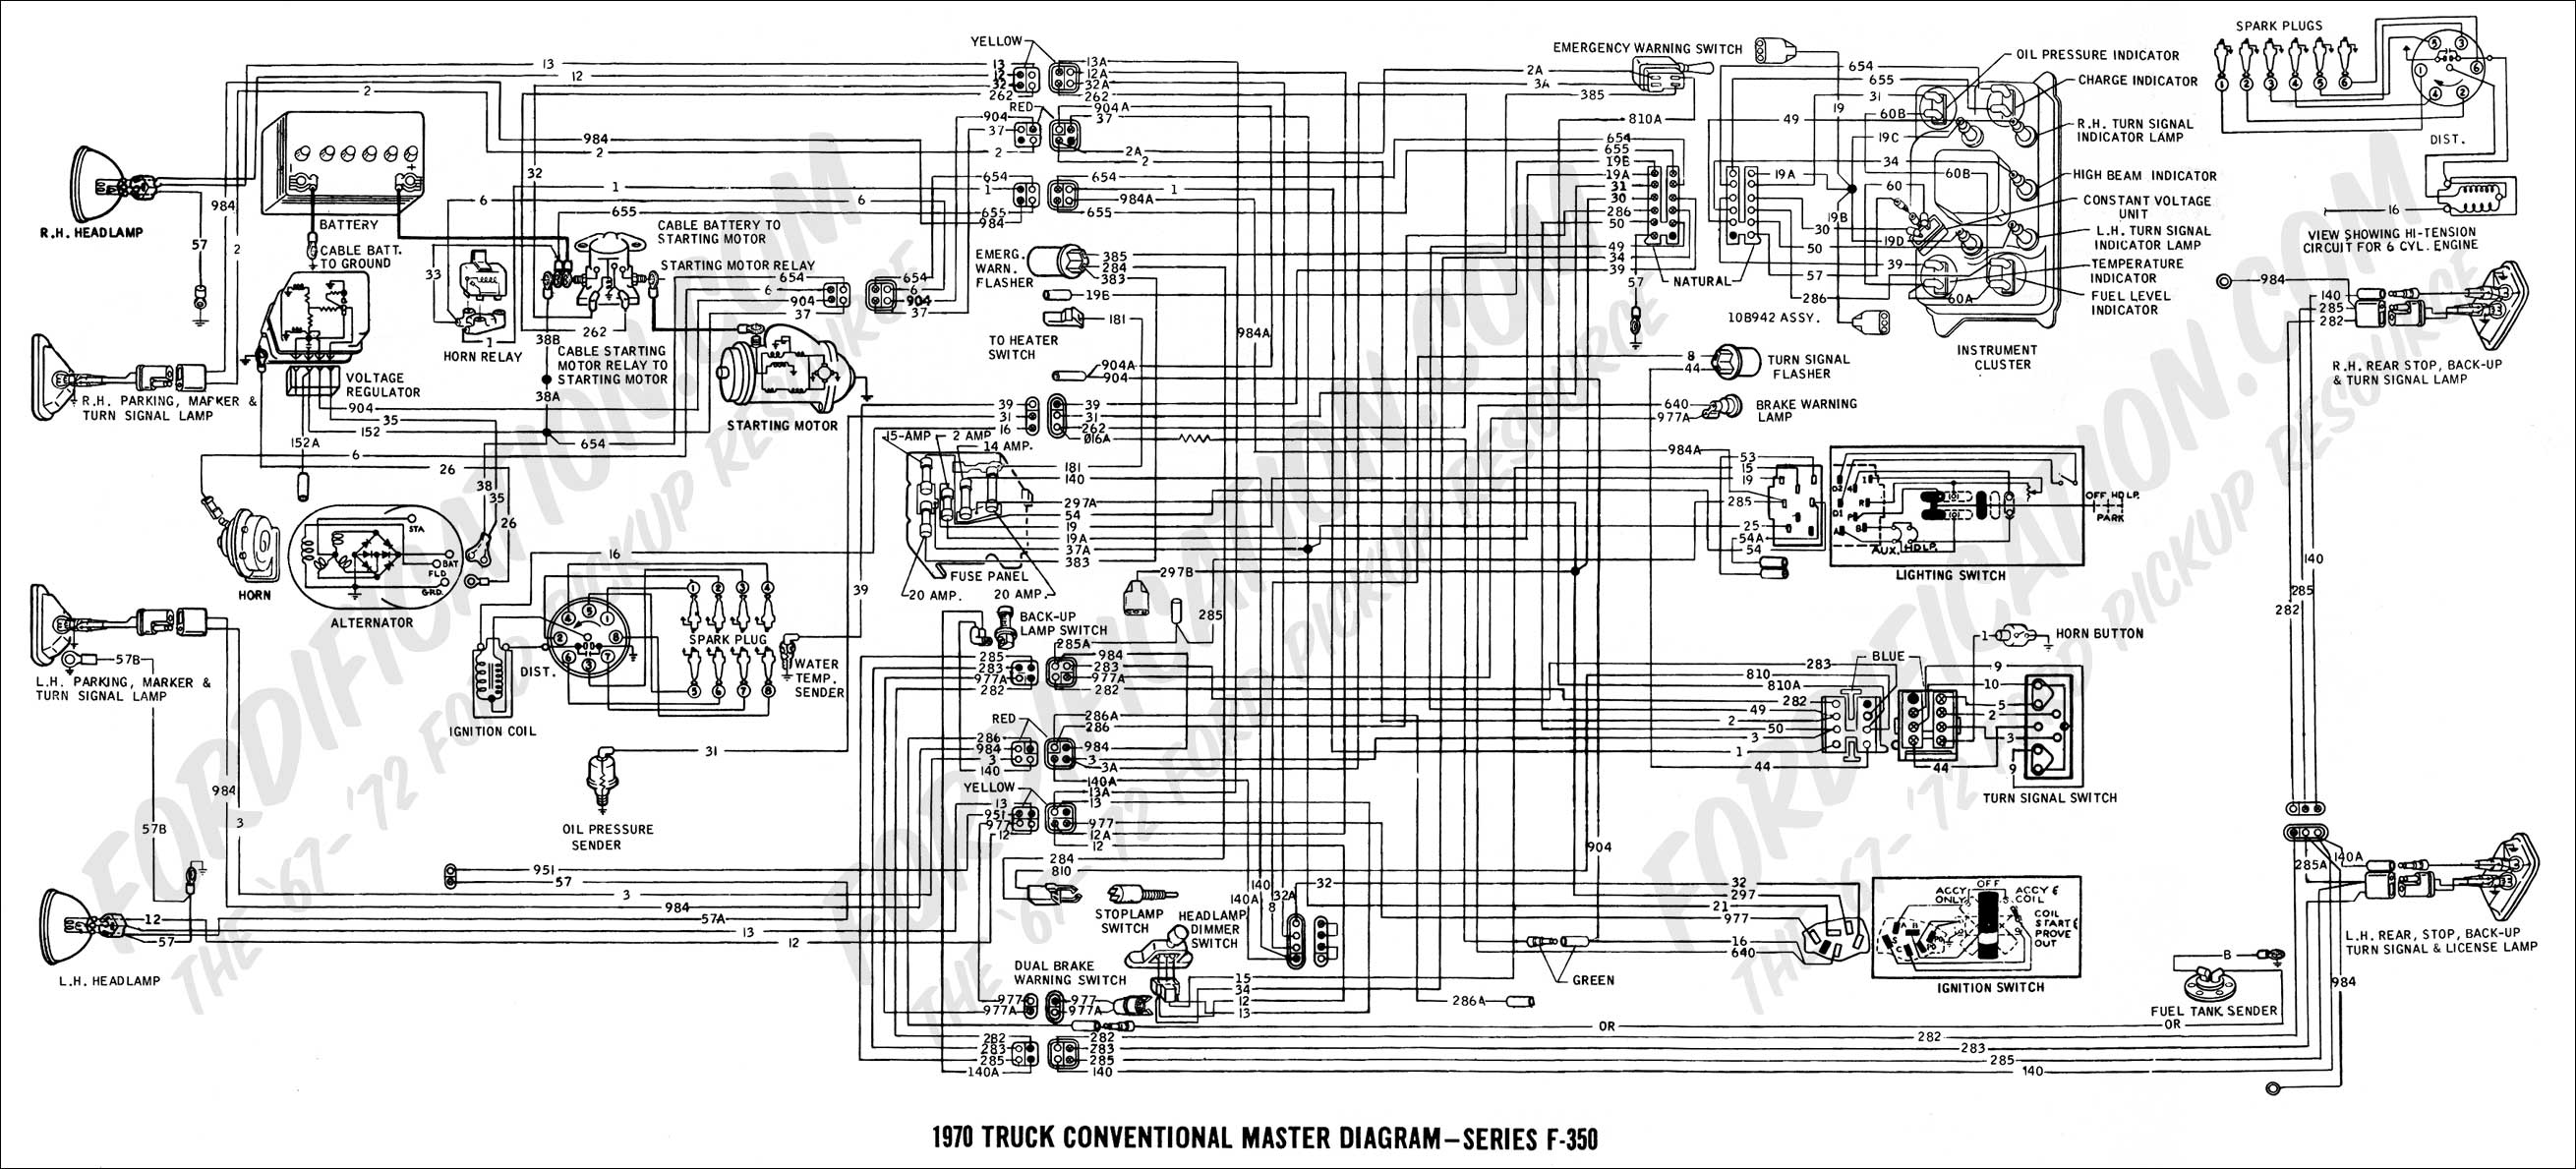 2000 Ford Explorer Stereo Wiring Diagram from www.fordification.com